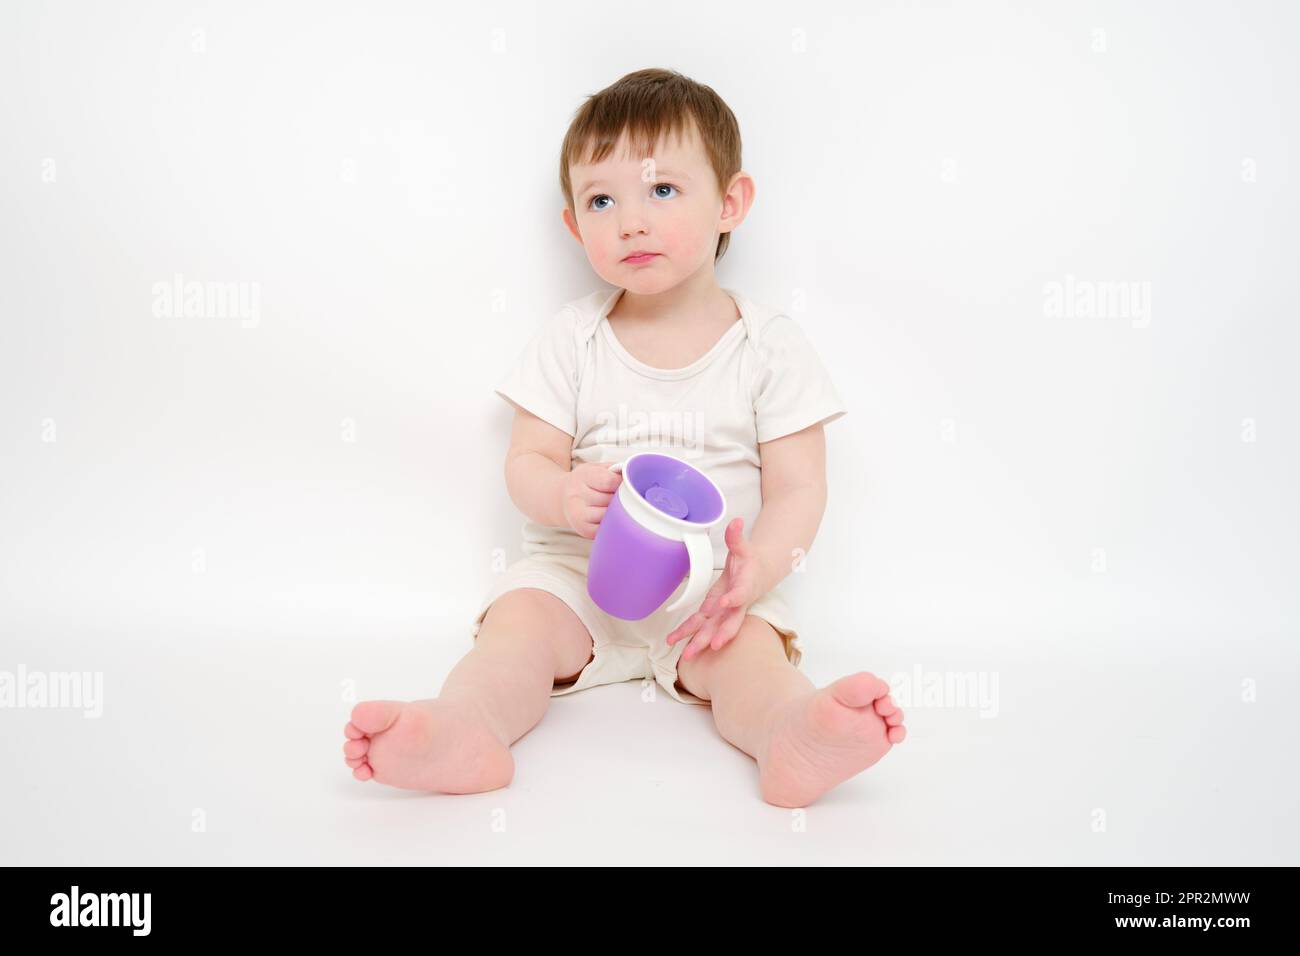 https://c8.alamy.com/comp/2PR2MWW/happy-baby-drinks-water-from-cup-on-studio-white-background-resting-child-with-cup-juice-in-hands-kid-about-two-years-old-one-year-nine-months-2PR2MWW.jpg